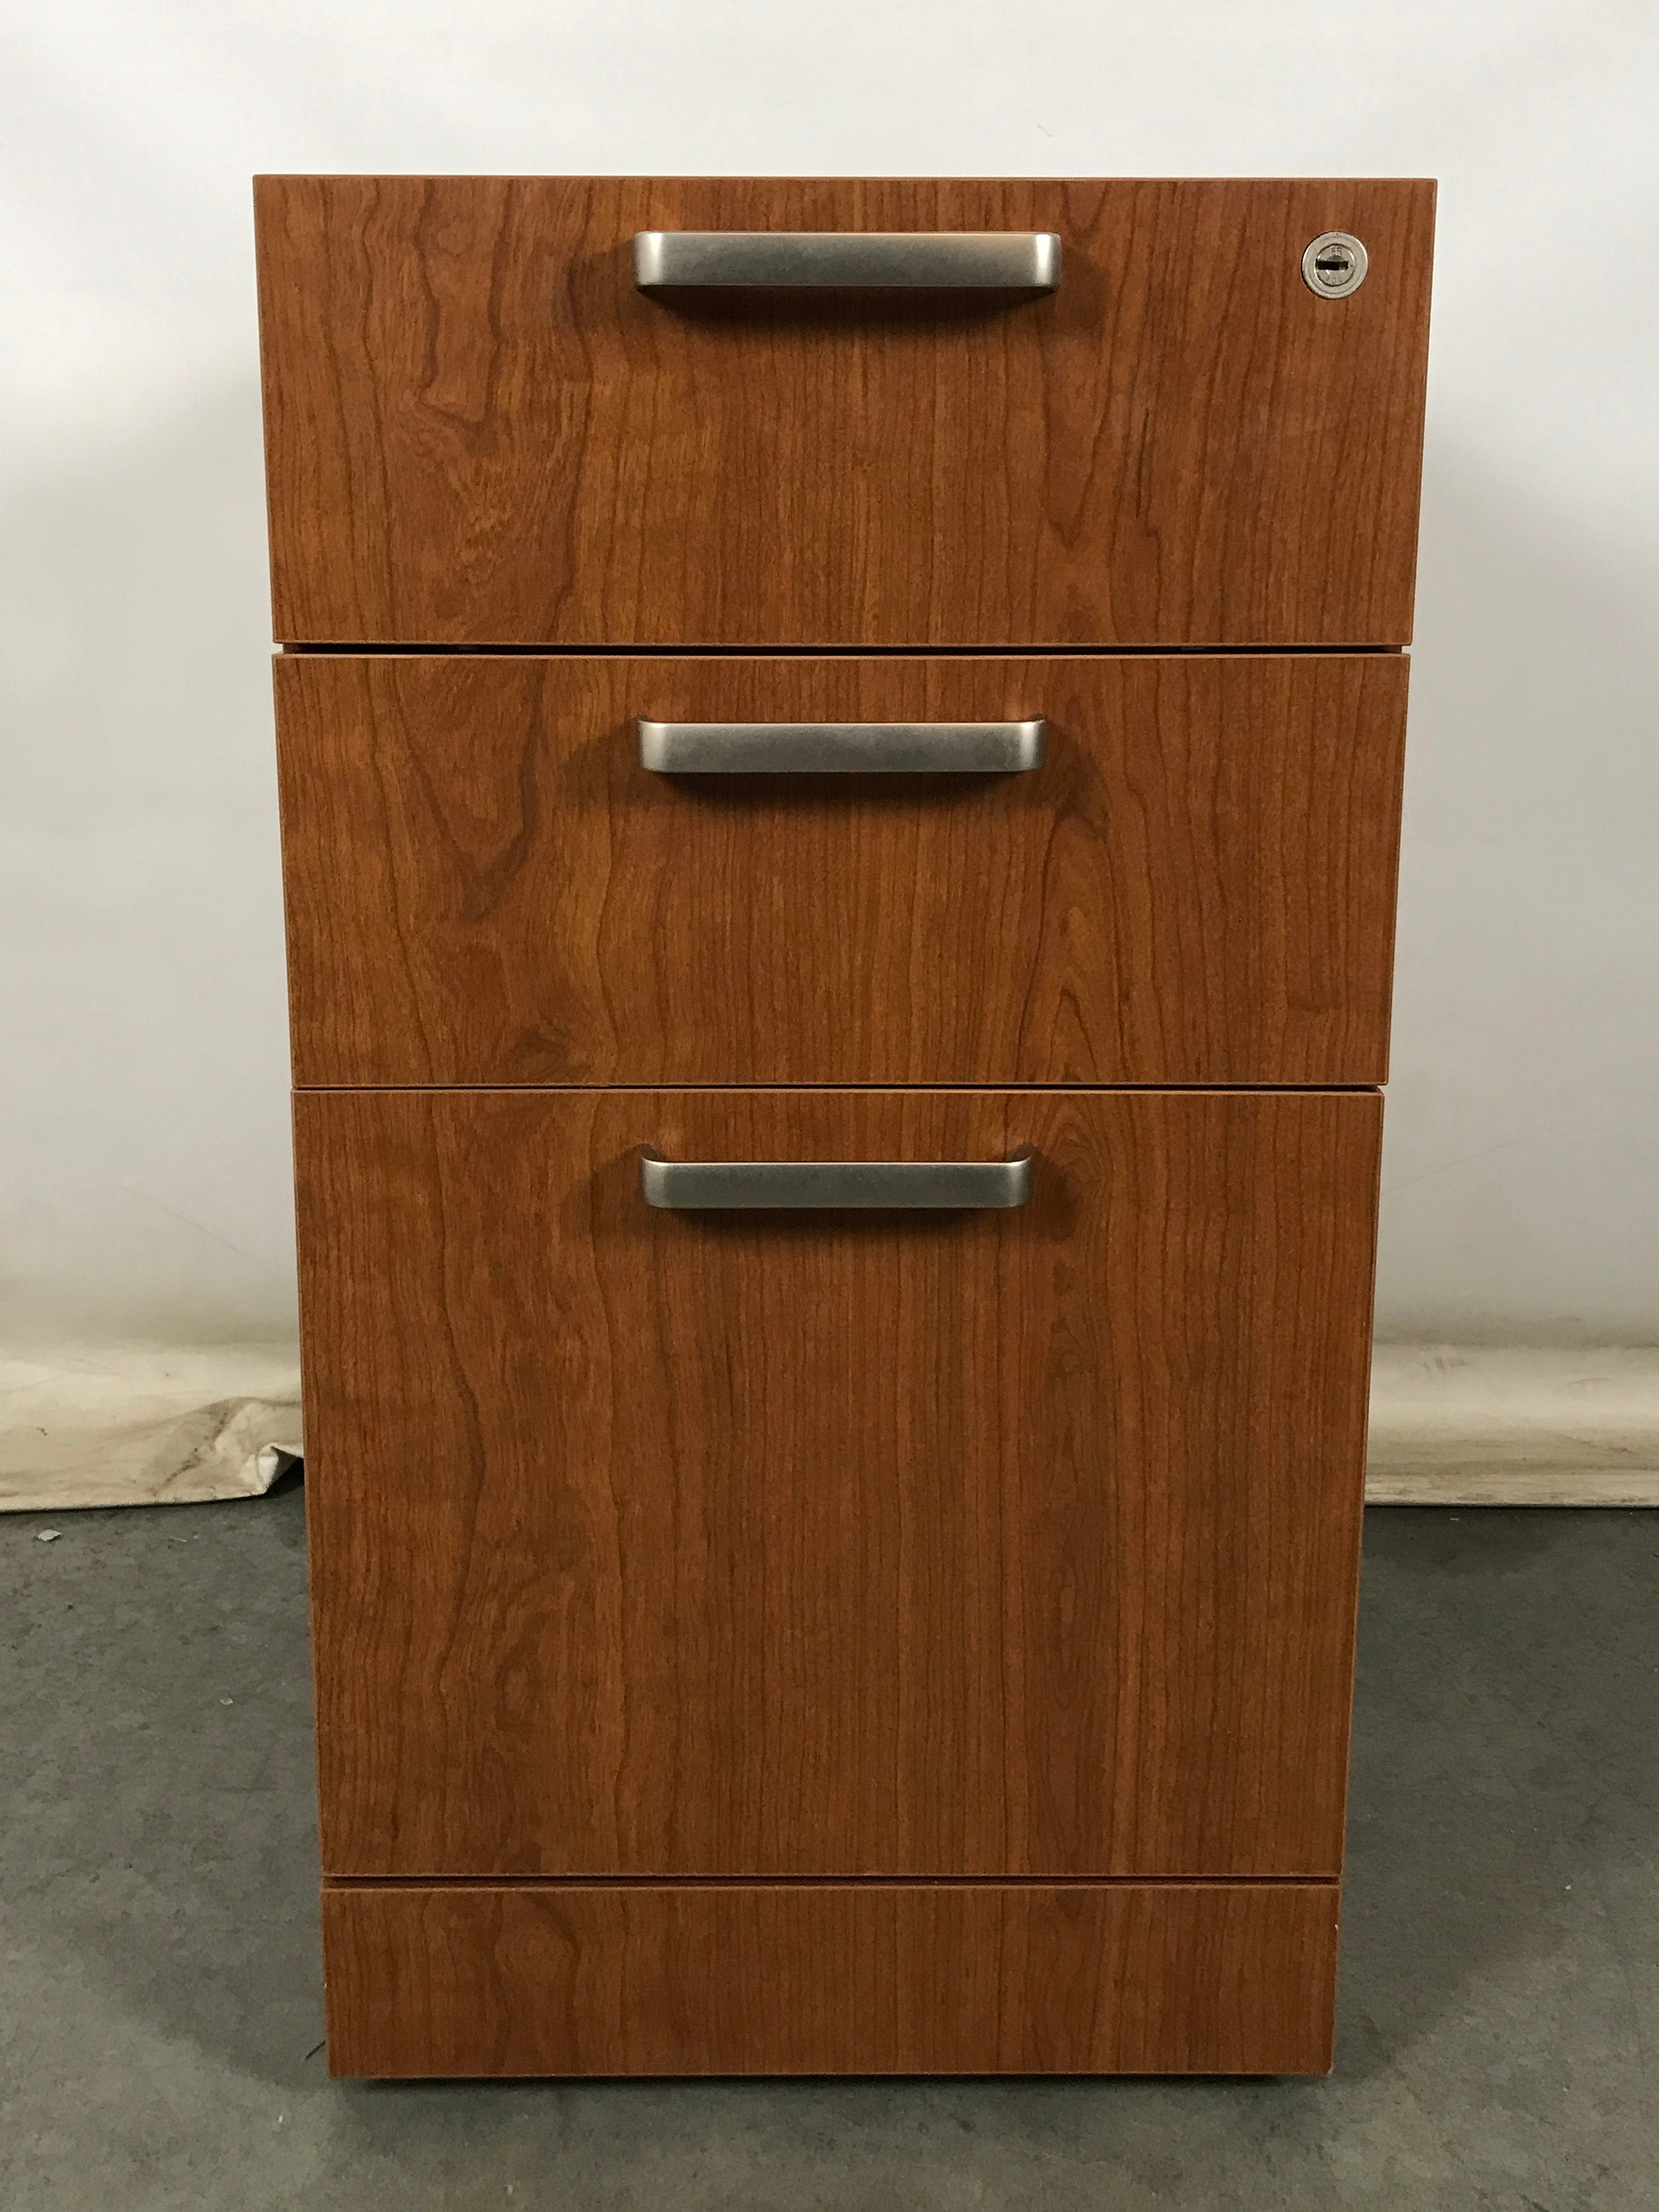 Steelcase 3 Drawer Wooden File Cabinet